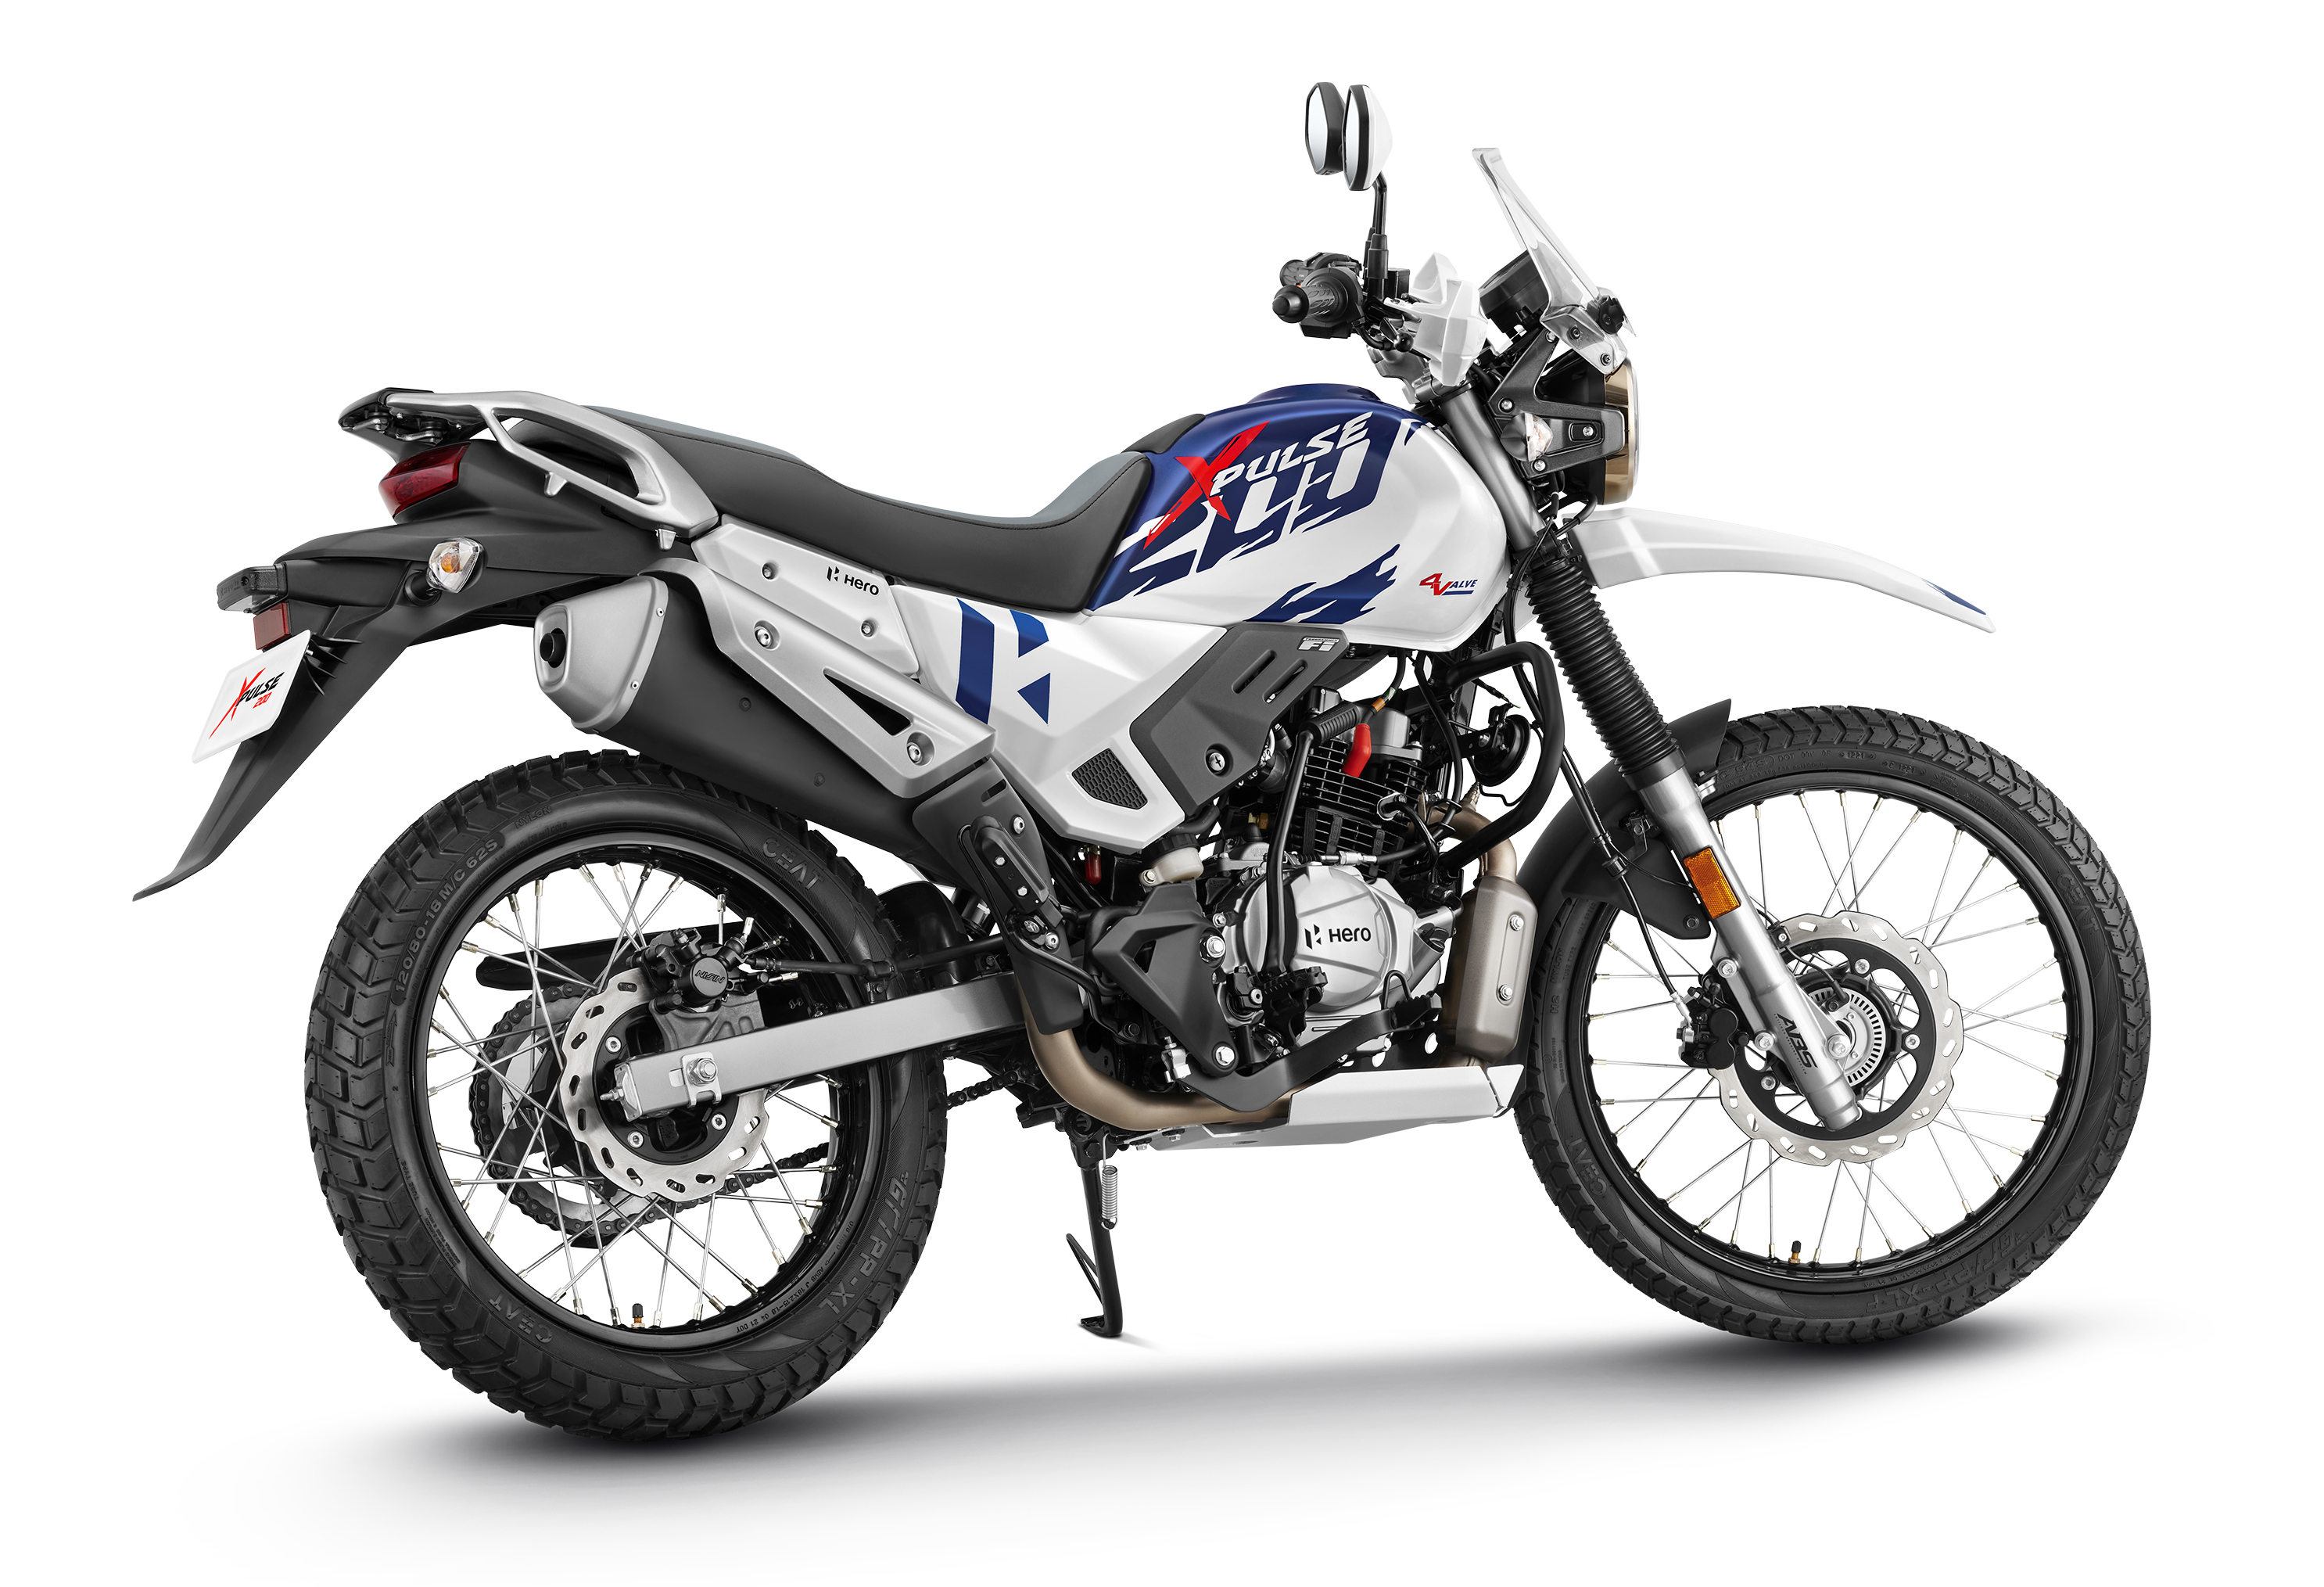 Hero Motocorp commences online bookings for the next lot of 'Xpulse 200 4 valve' after the first batch completely sold